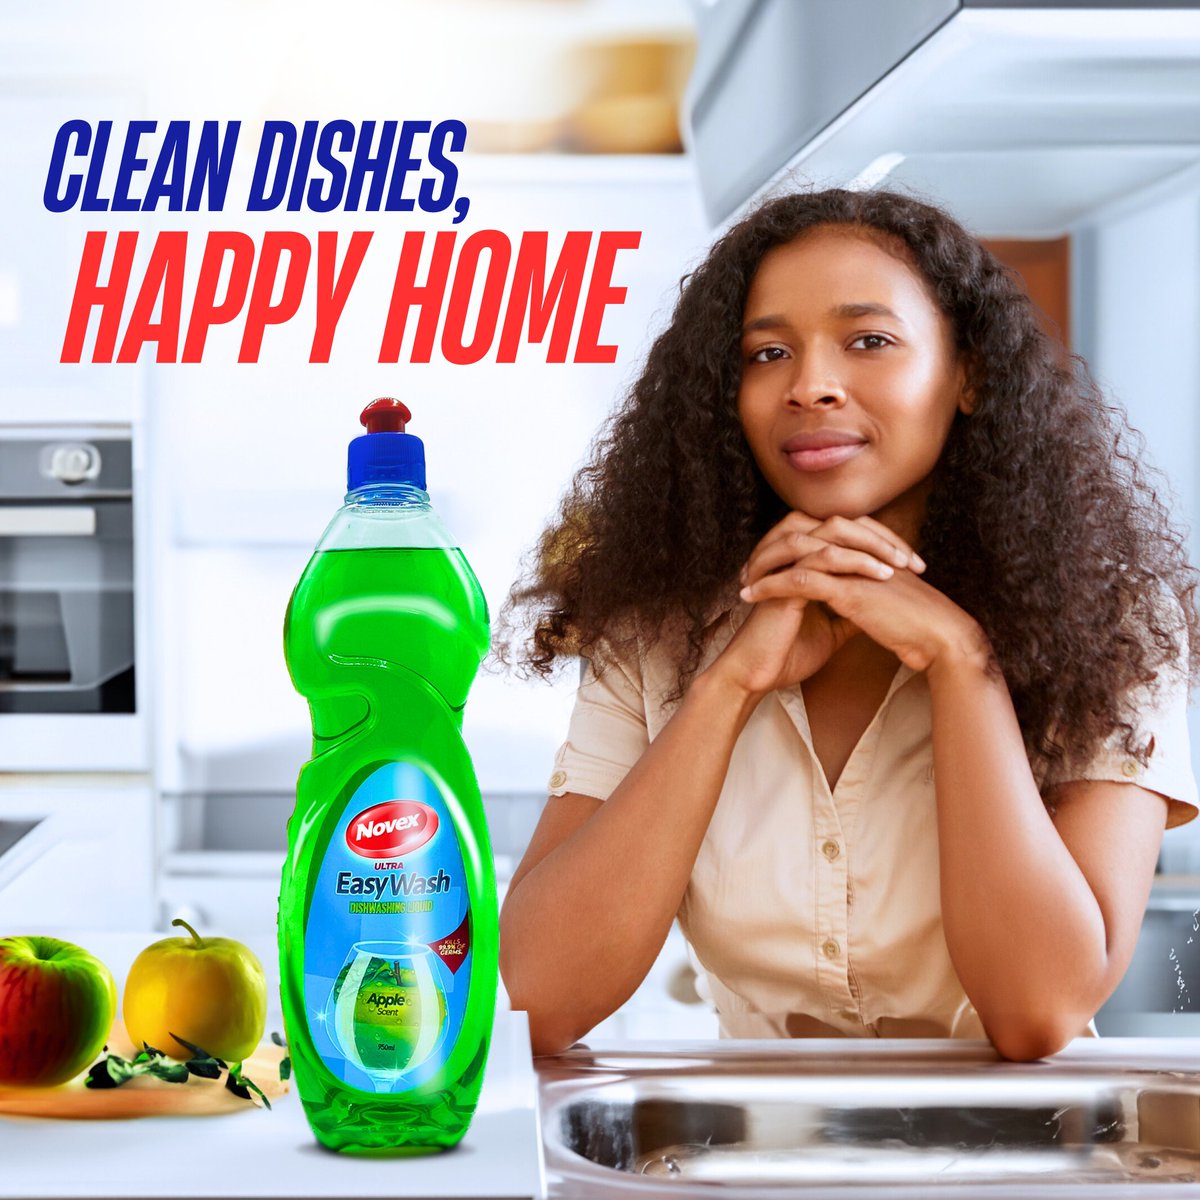 Novex dishwashing liquid is the unsung hero your kitchen needs – keeping your home's heart clean and shining.

Get yours today!

#novexnigeria #novexng #novexdishwash #foodielagos #KitchenHero #HomeSweetHome #DishwashingDelight